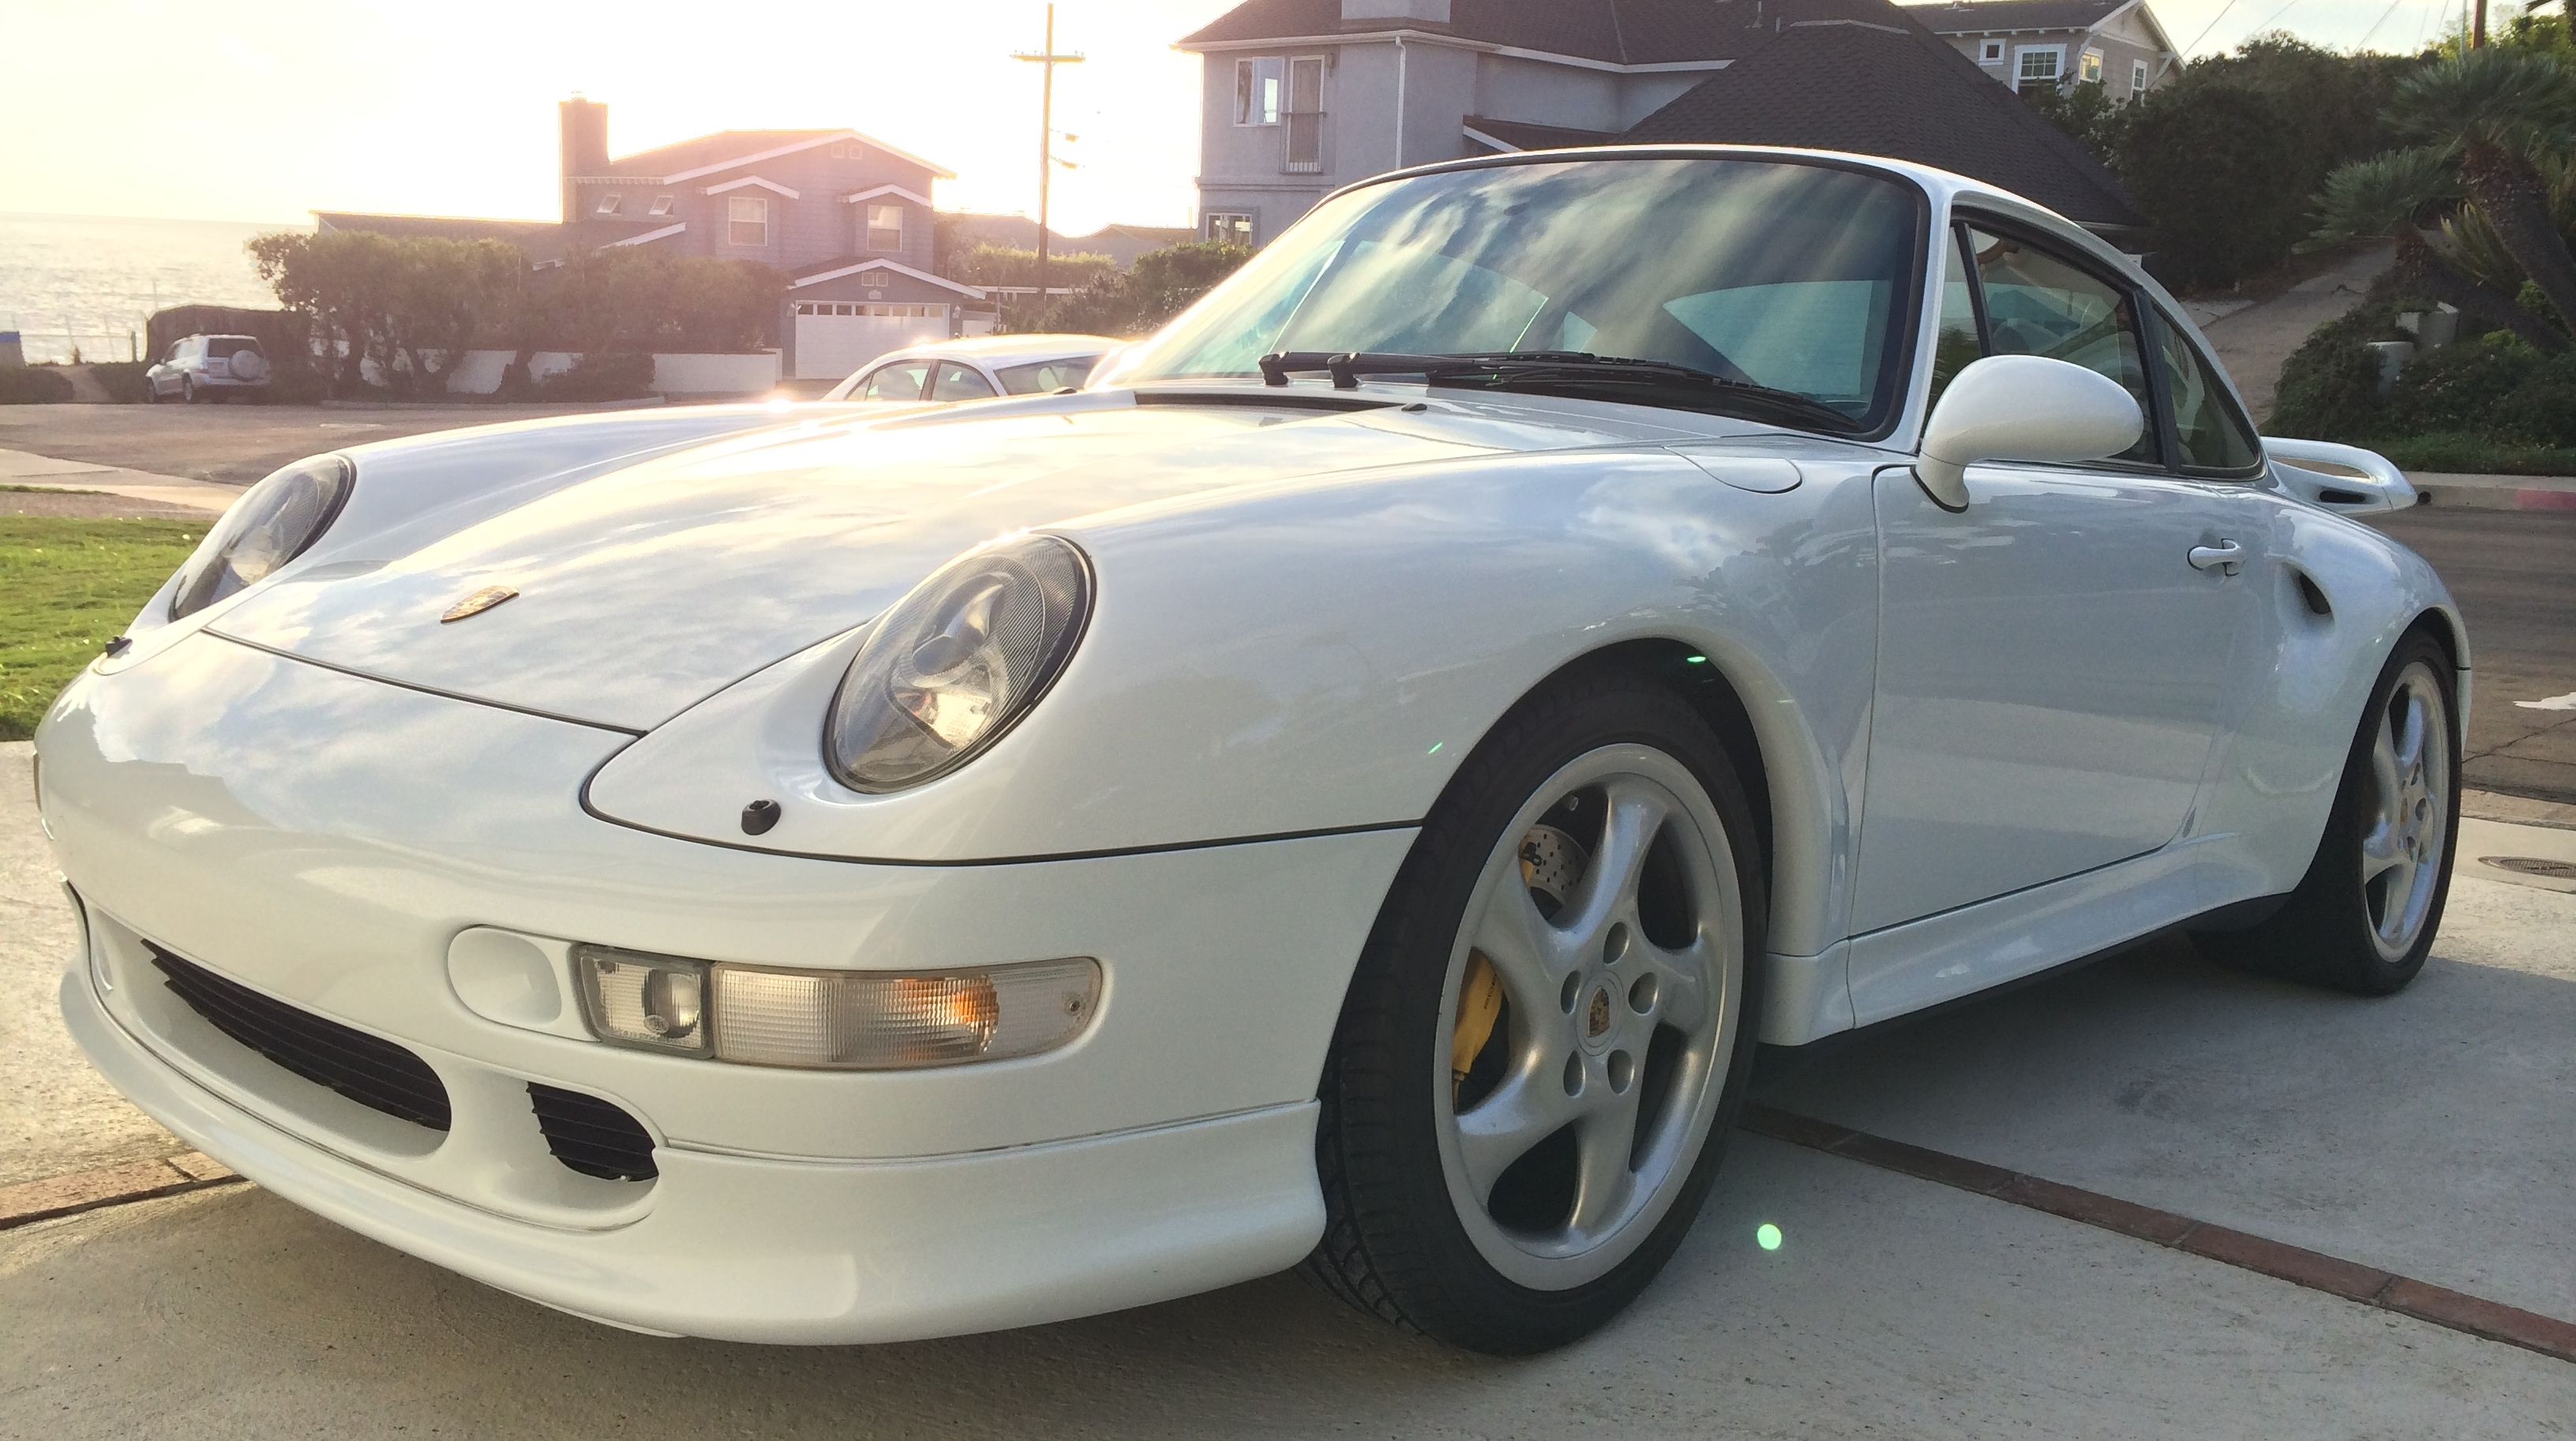 Yes, it’s beautiful but is this 911 ANDIAL 3.8 C2S really worth $228k?